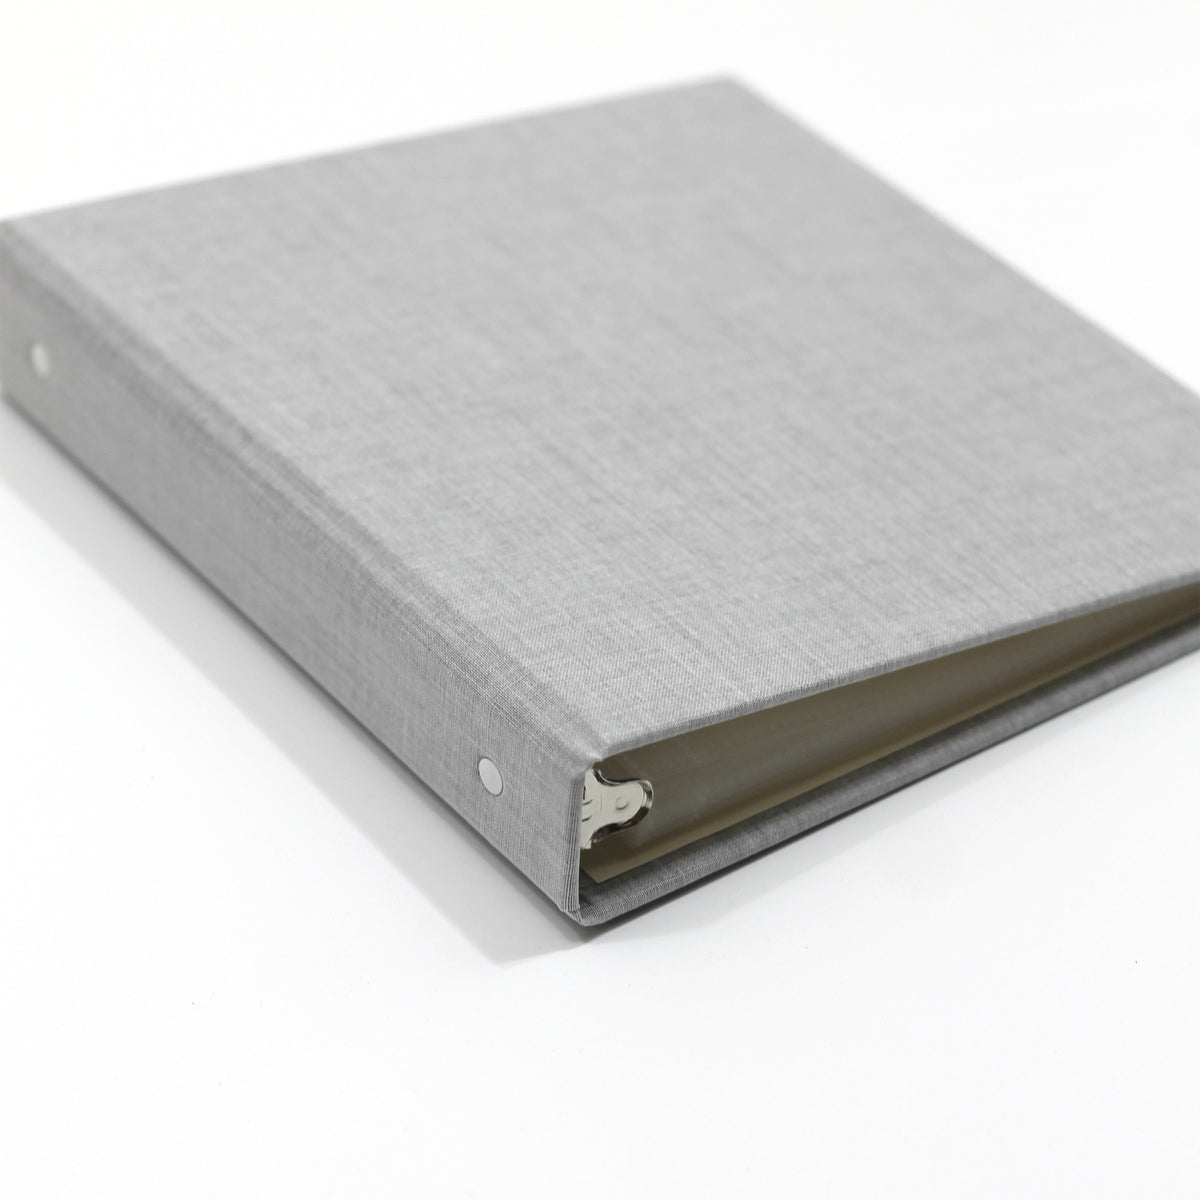 Custom Binder with Dove Gray Linen Cover